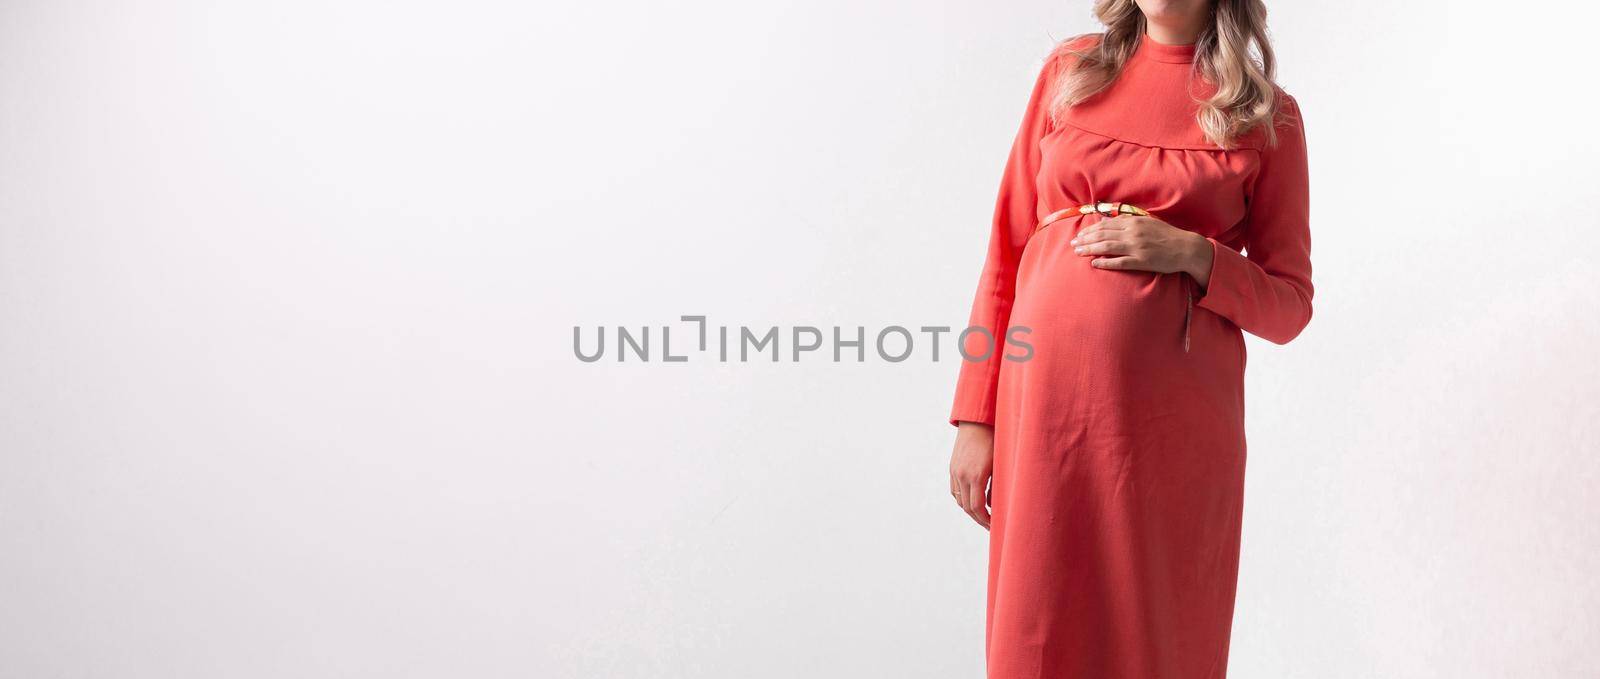 Pregnant woman on white wall background